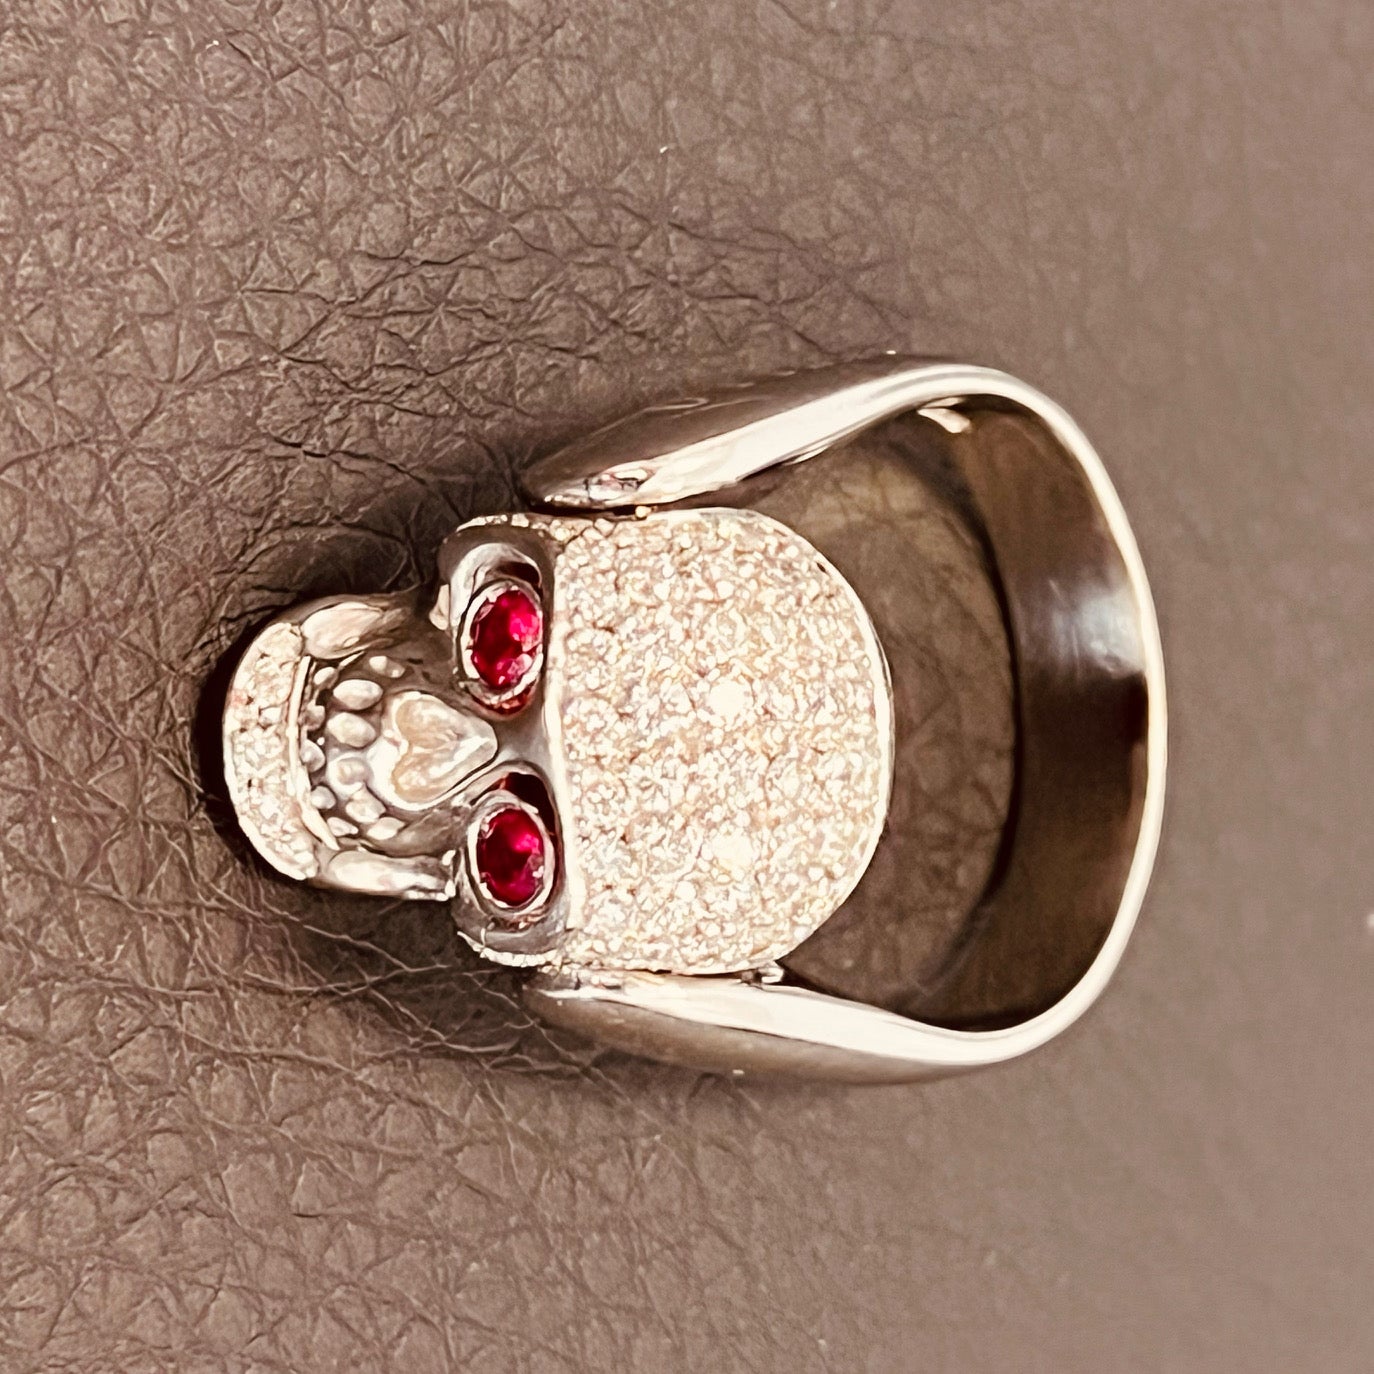 Gavello 18ct white gold and diamond skull ring – the articulated pave’ set skull with ruby eyes and completely diamond set. The reverse with red enamel detail. Ring size is: N1/2 (UK), 54.5 (EU), 7.25 (US), 17.,3mm (inside ring diameter), 54.4mm